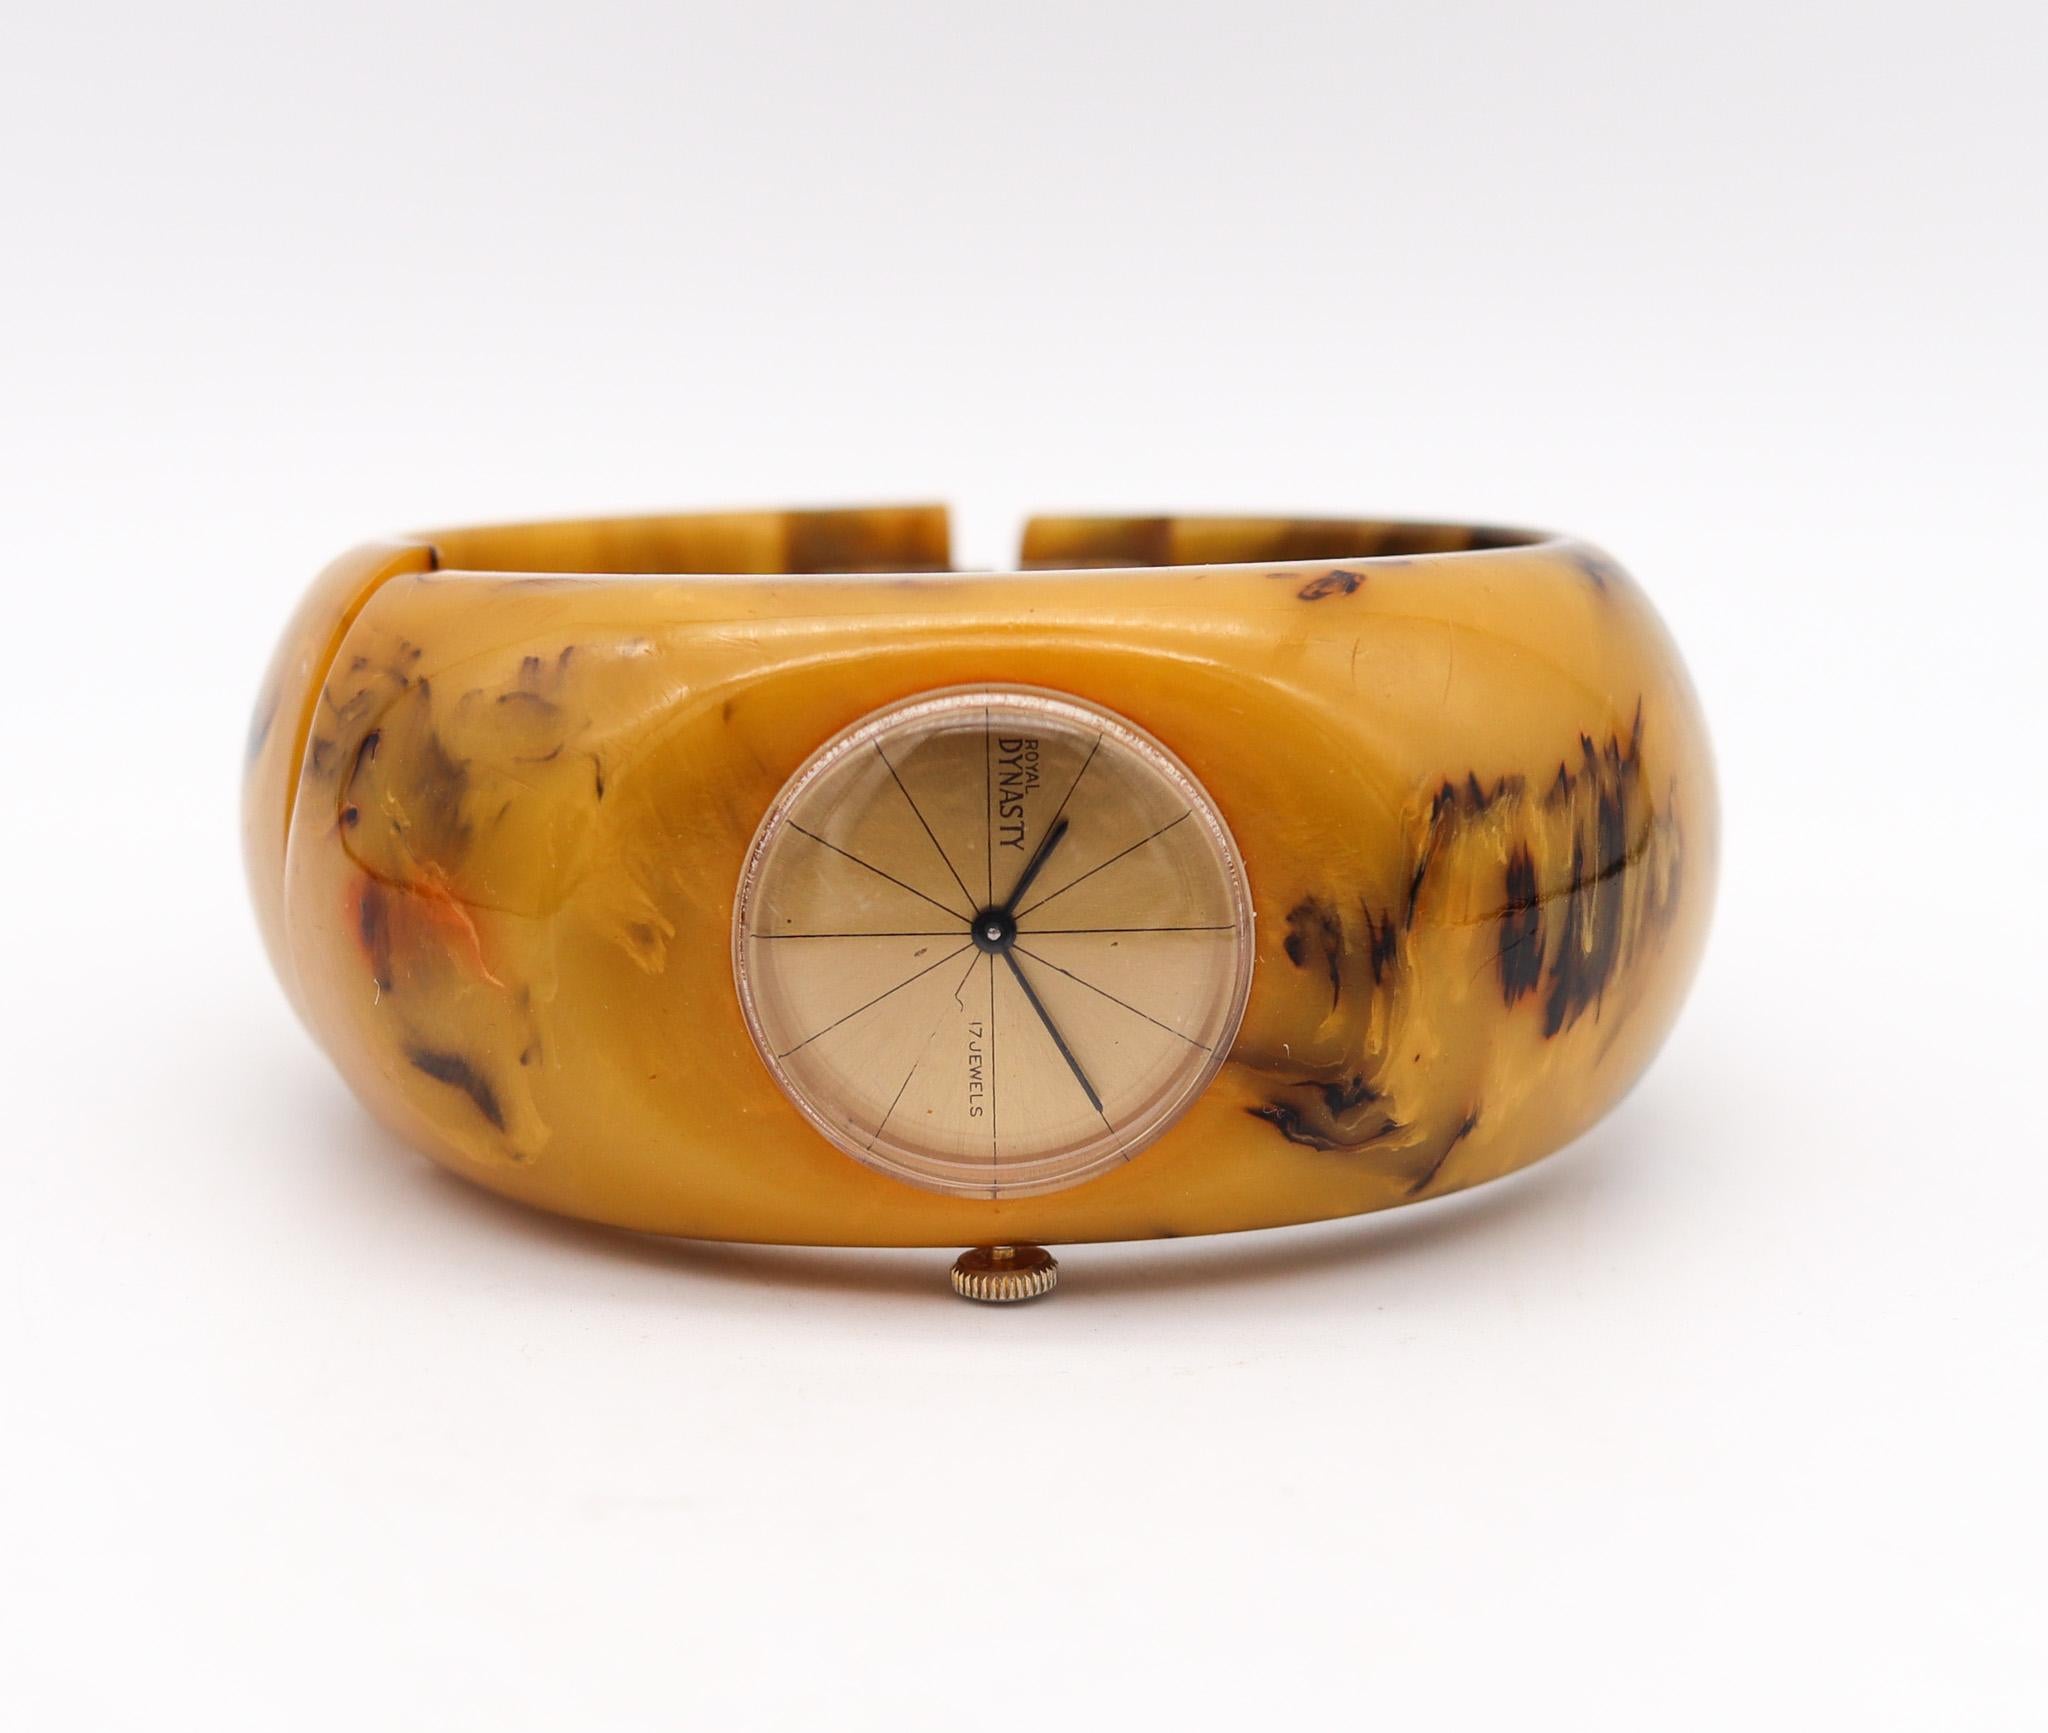 Butterscotch Bakelite Catalin Clamper Watch designed by Royal Dynasty.

A rare vintage genuine butterscotch Bakelite/Catalin clamper watch bracelet created by the Royal Dynasty Company. There is a hinge that allows the bracelet to open up and slip